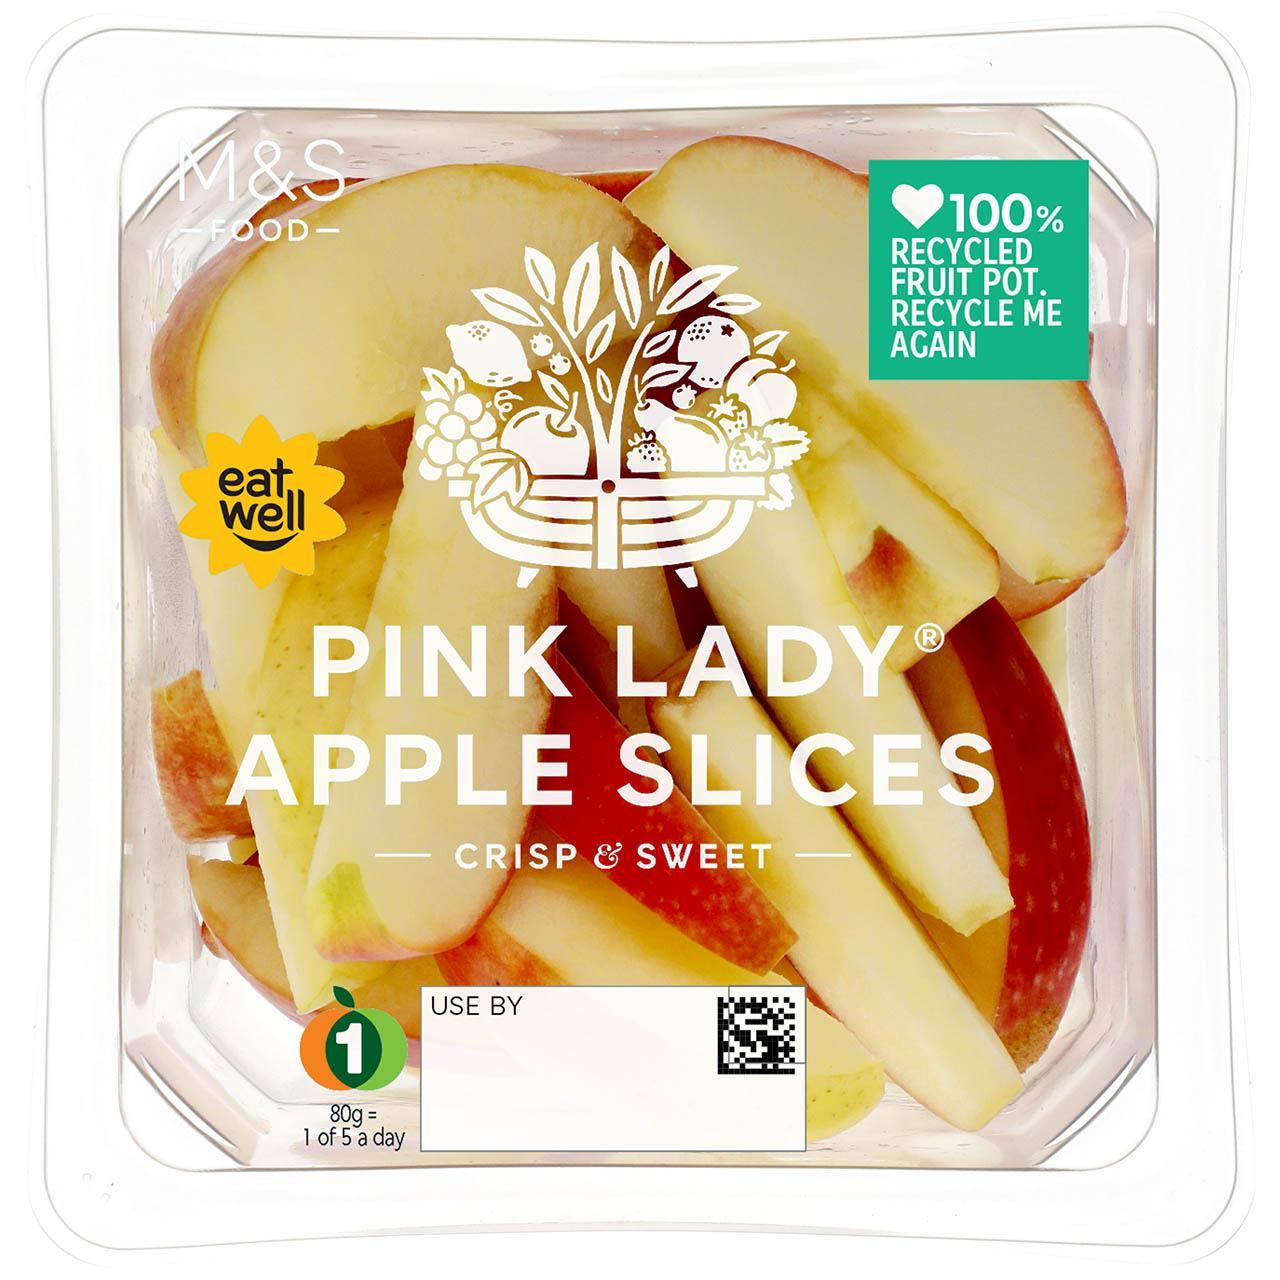 M&S Pink Lady Apple Slices